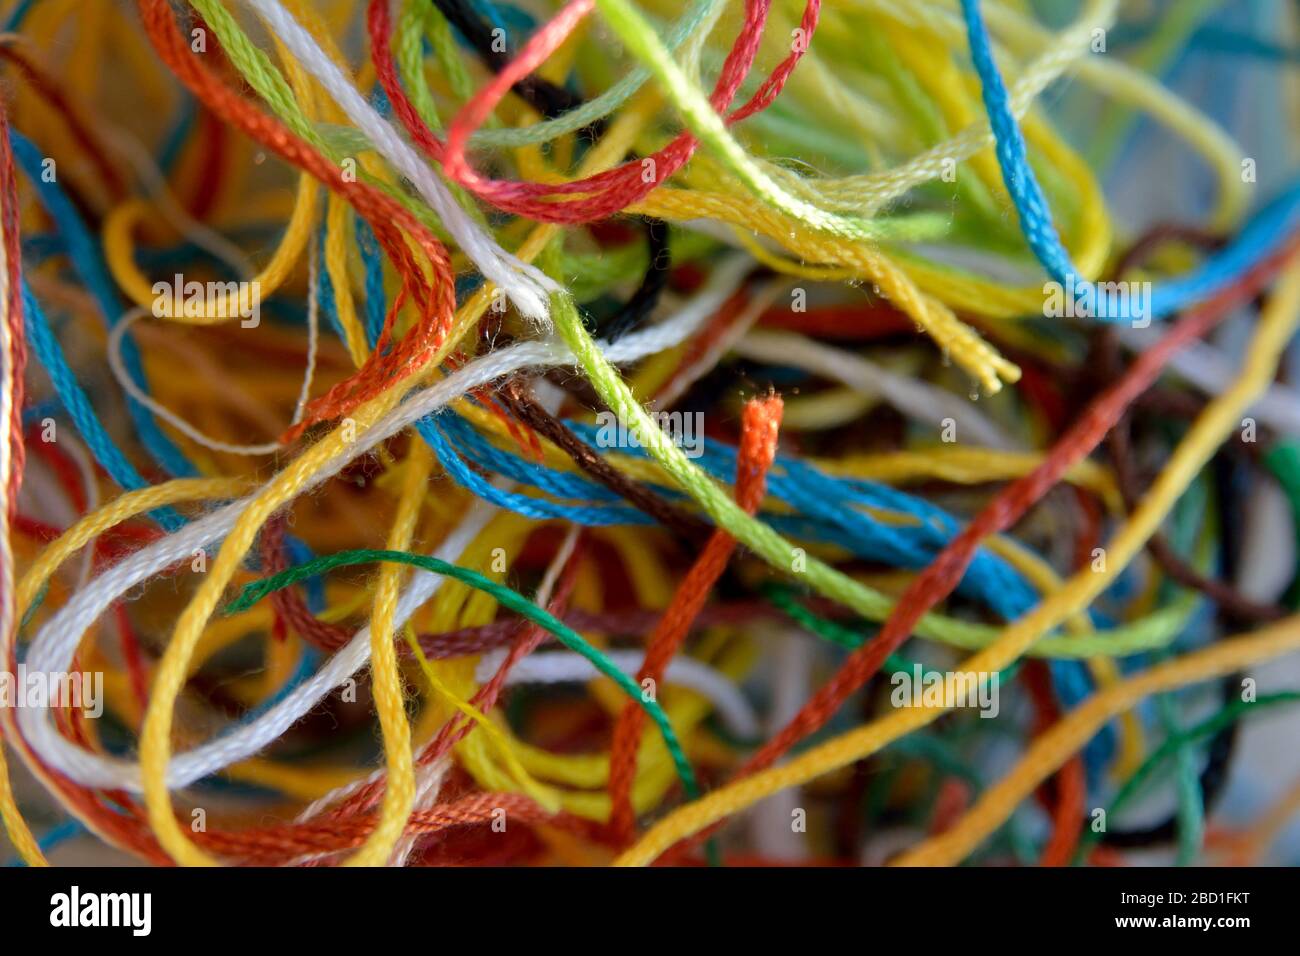 Multicolored Decorative Rope Scattered In A Mess Textile Manufacture  Threads Decor Stock Photo - Download Image Now - iStock